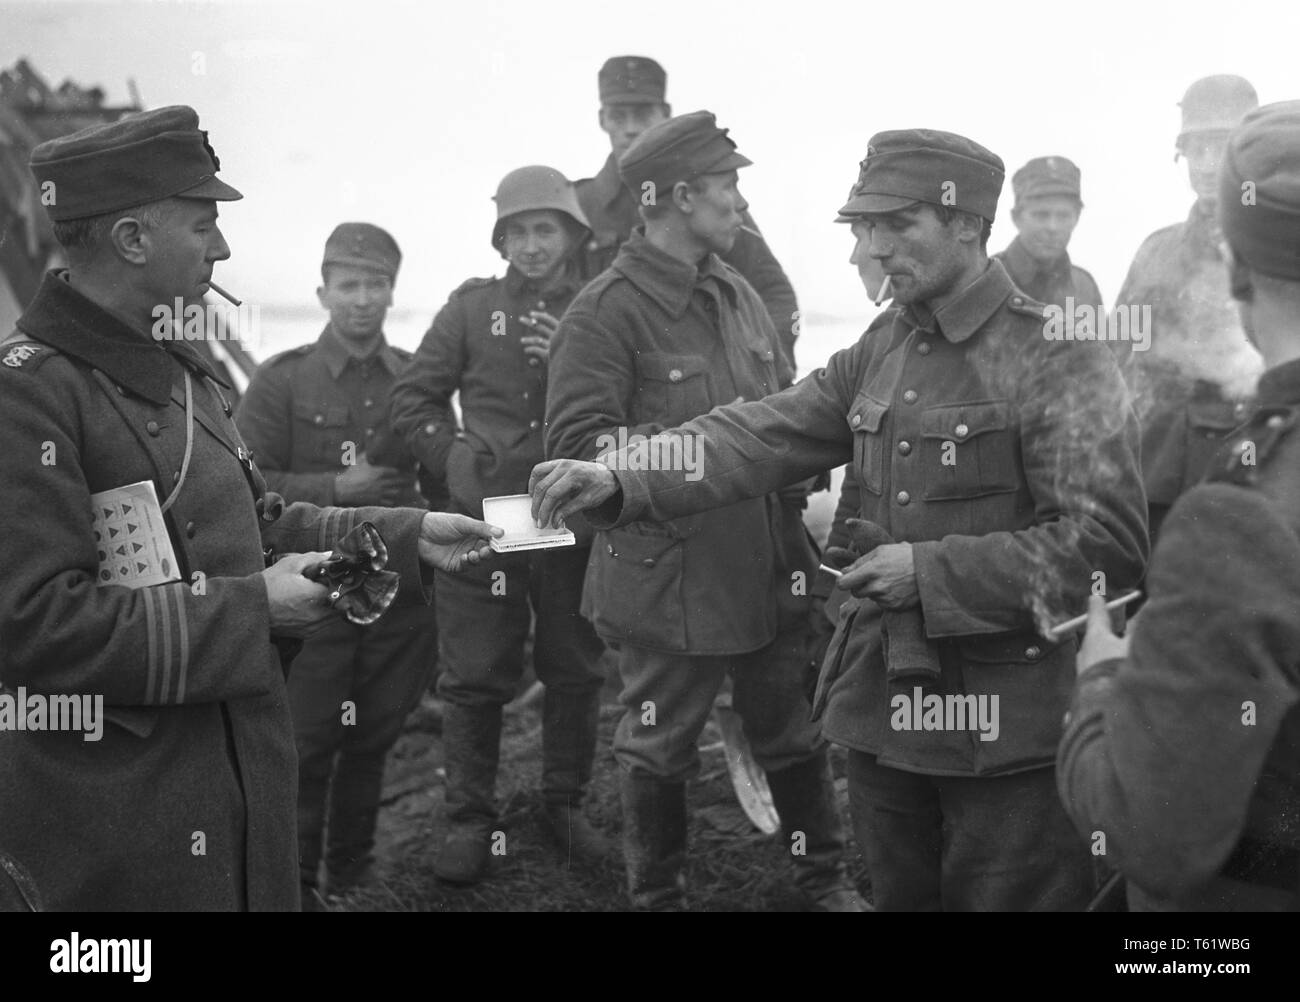 The Winter War. A military conflict between the Soviet union and Finland. It began with a Soviet invasion on november 1939 when Soviet infantery crossed the border on the Karelian Isthmus.  A finnish officer offers cigarettes to finnish soldiers close to the Mannerheim Line on the Karelia. January 1940. Photo Kristoffersson ref 95-19 Stock Photo